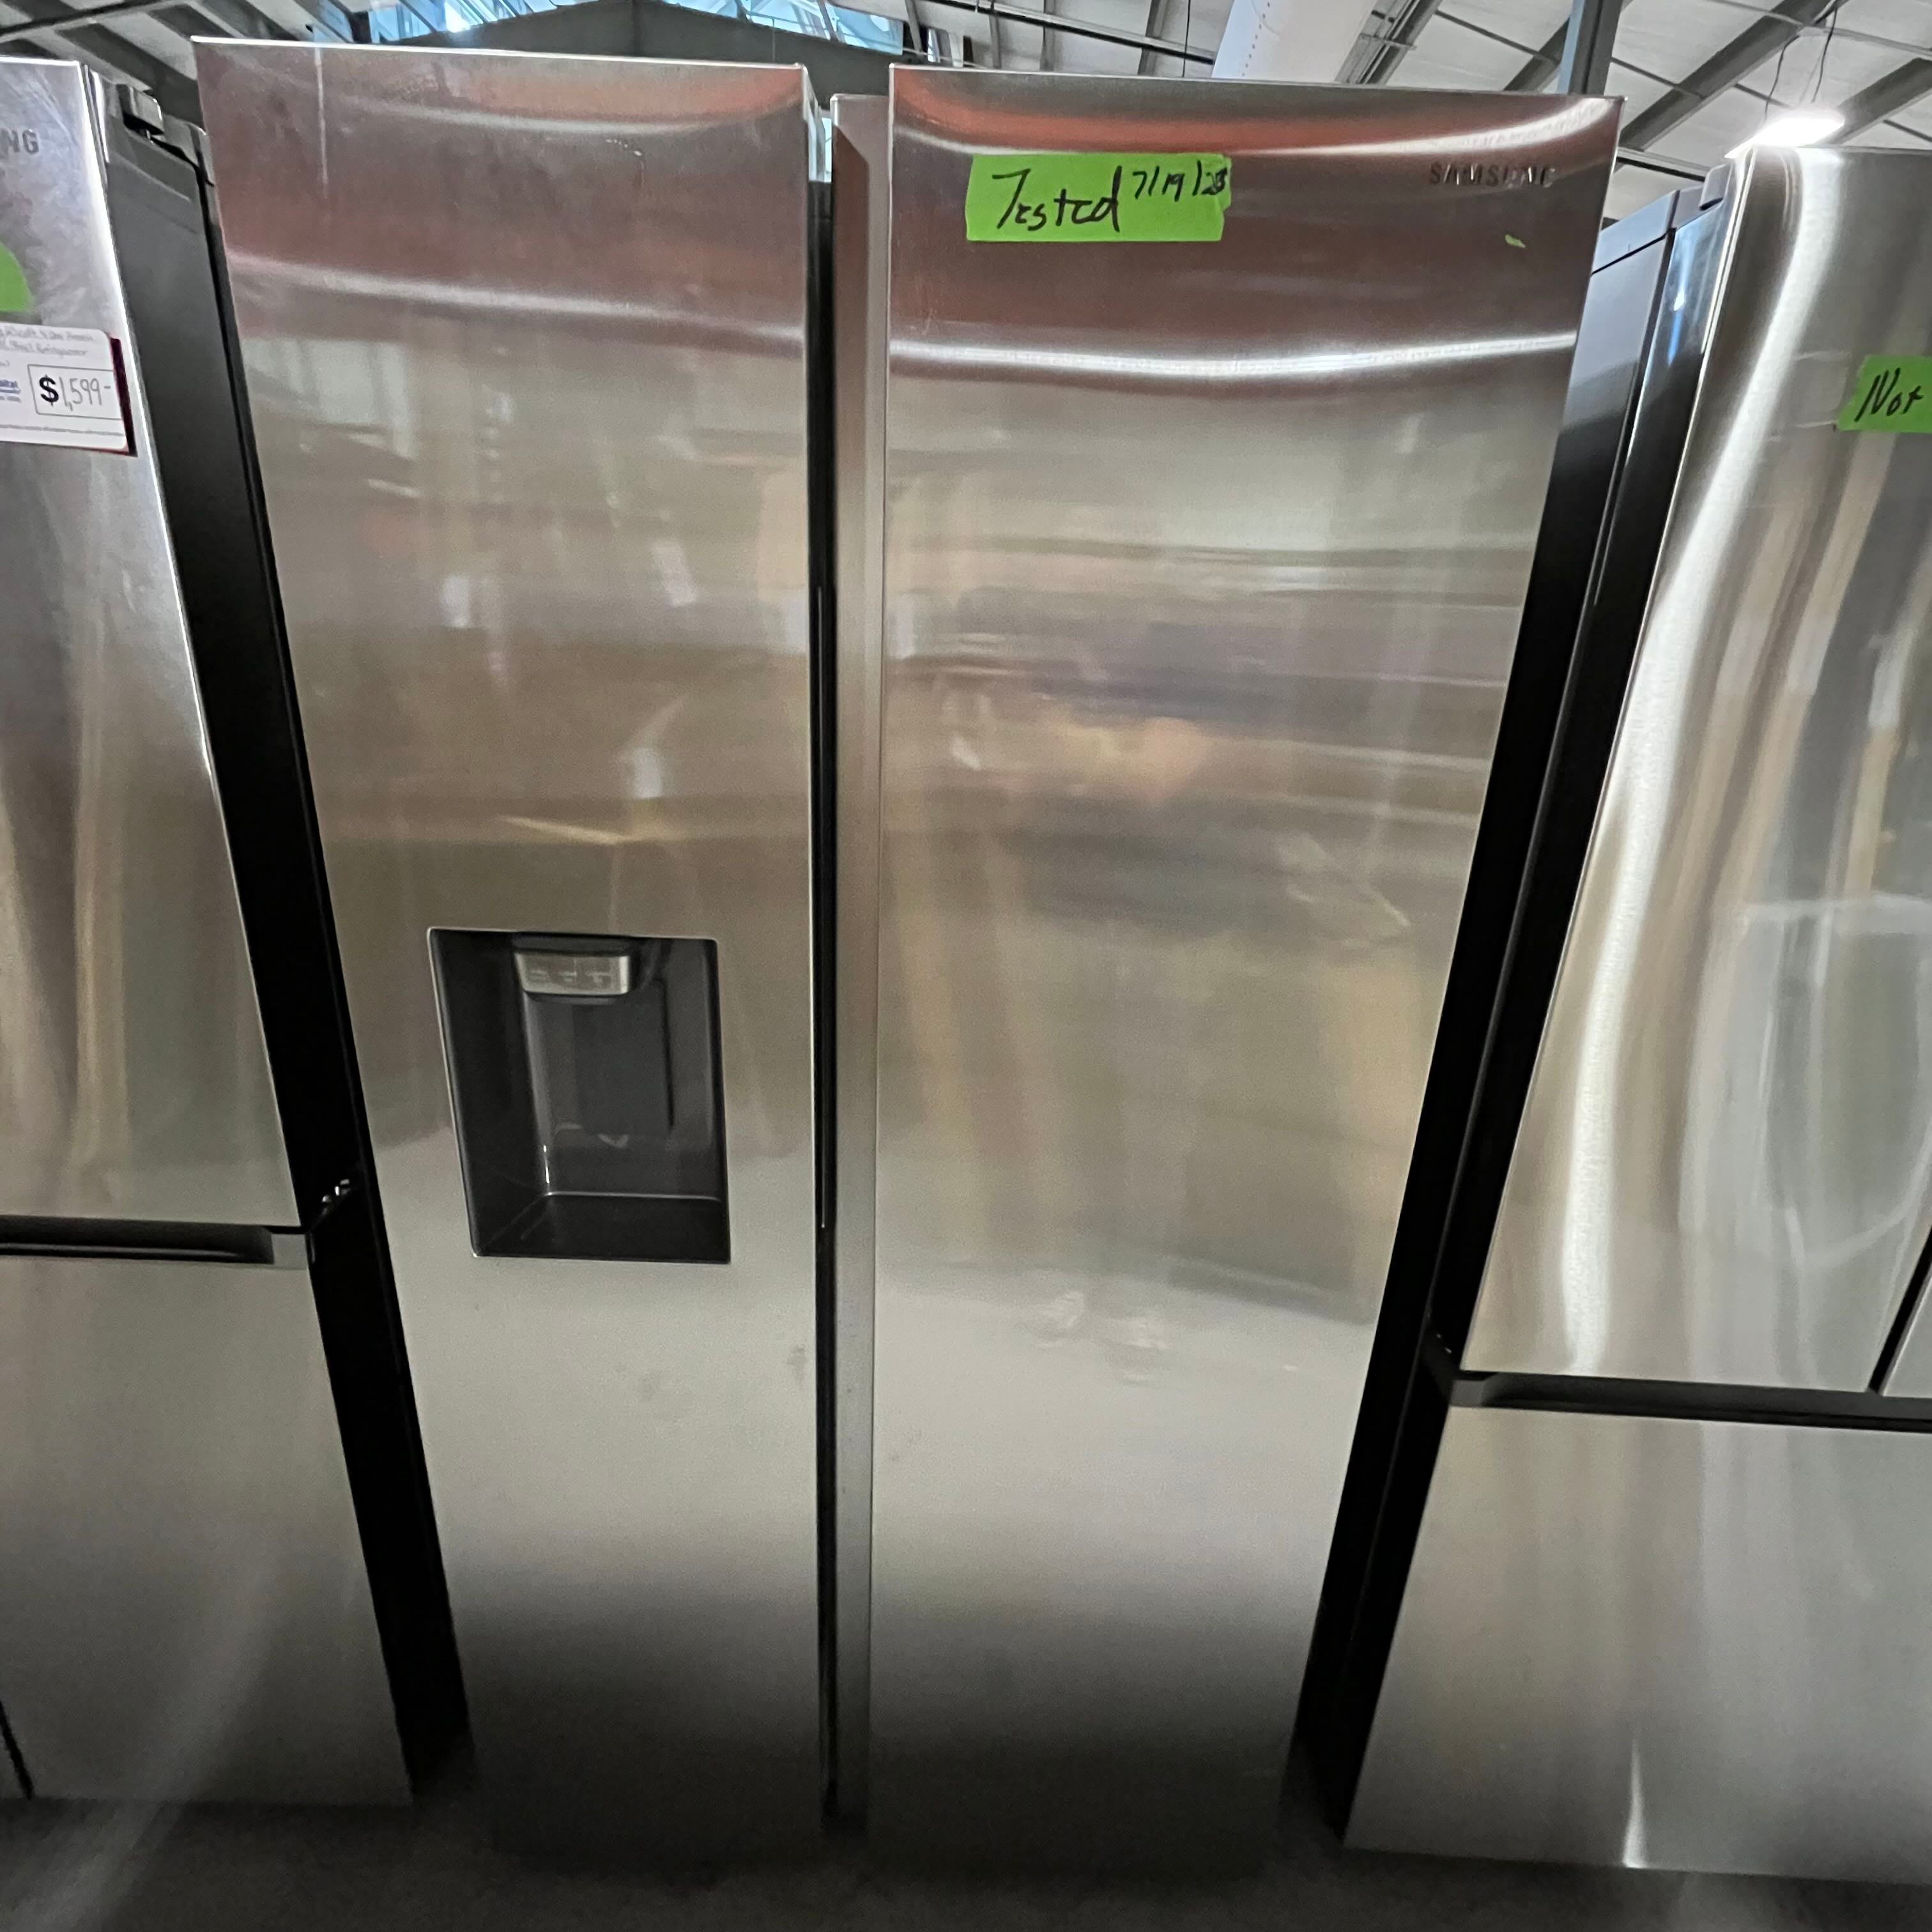 G923 Samsung Side by Side Stainless Steel Refrigerator